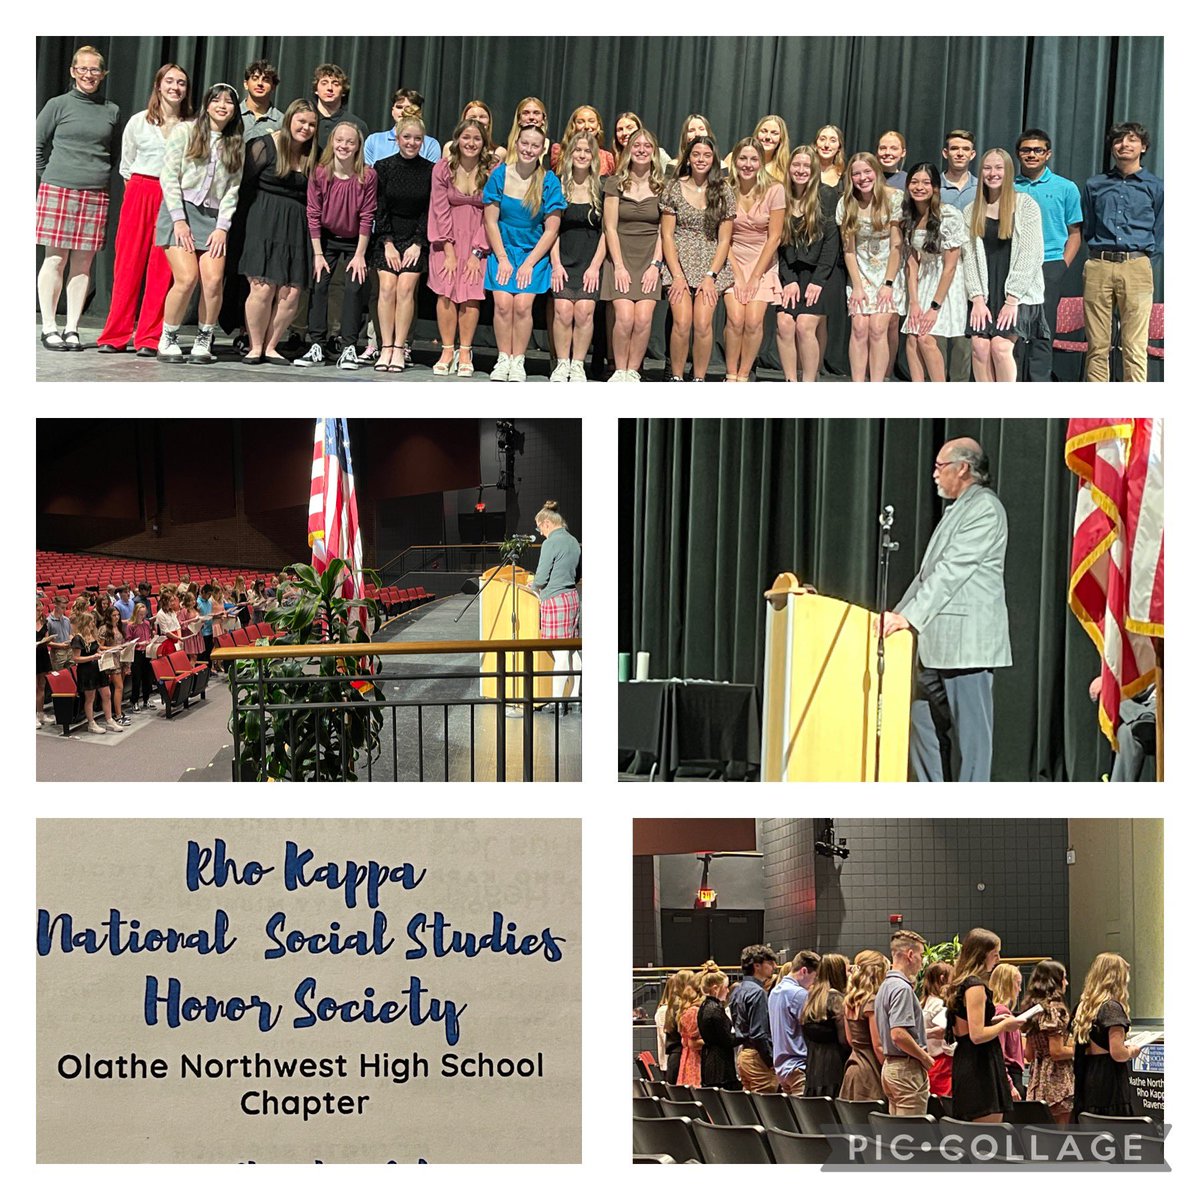 Tonight, the @RhoKappa_Ravens inducted 27 new members at their 5th annual induction ceremony! Congrats to their chapter’s newest members. Thank you for your keynote, Dr. Leiker! @theravennation @ChrisZuck @olatheschools @JCCCtweet